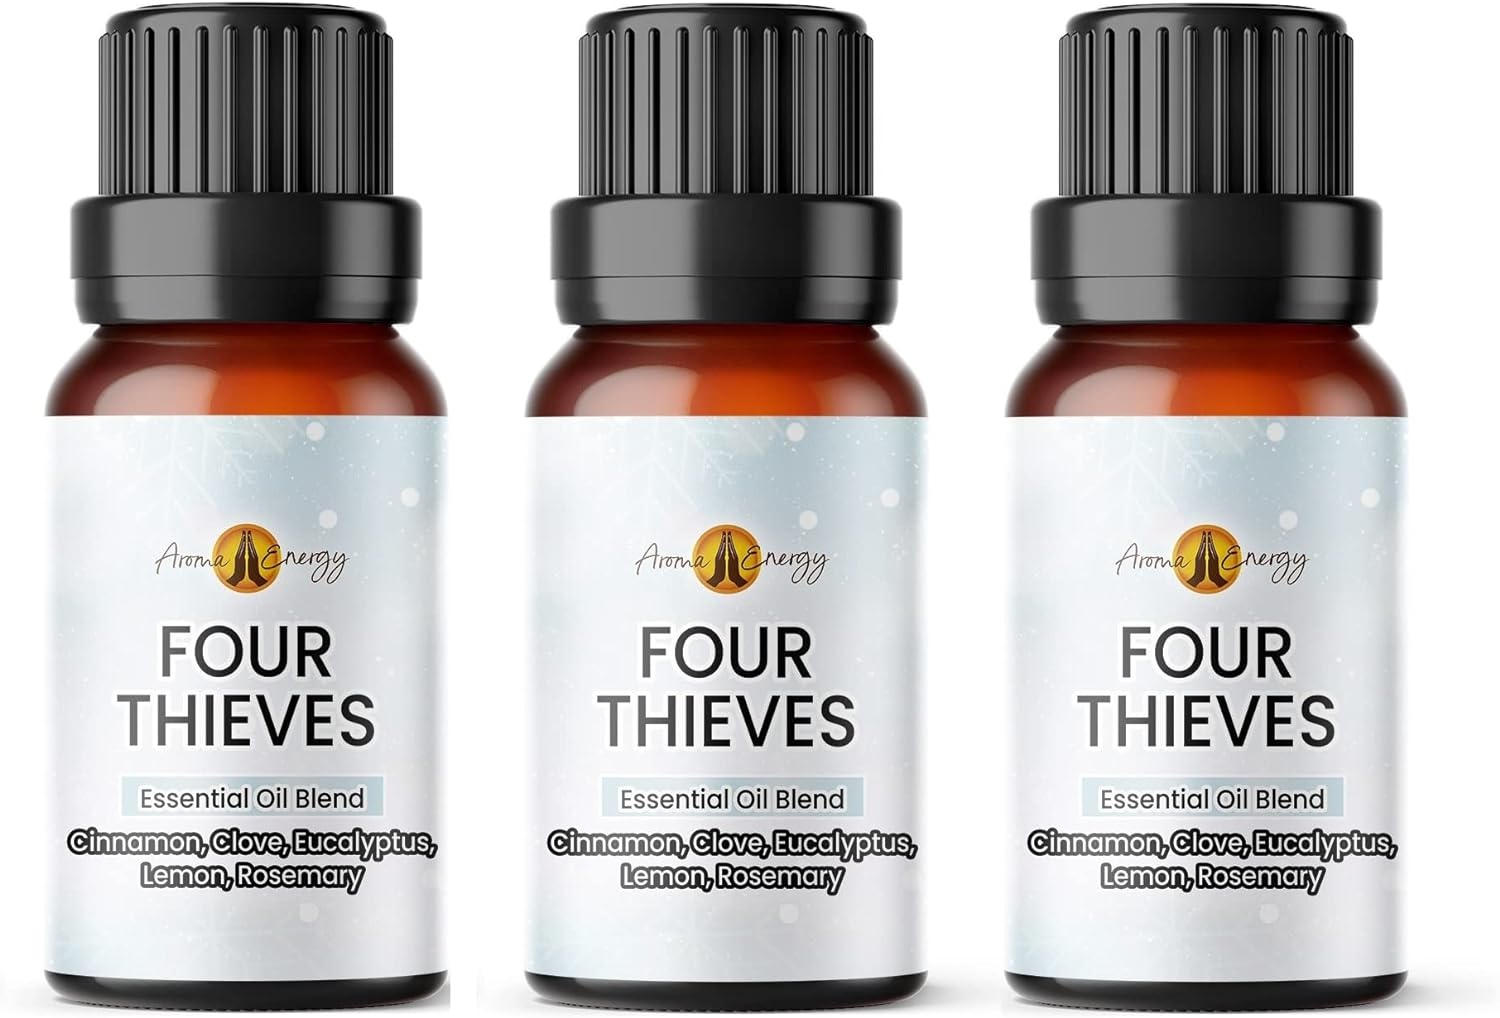 Four Thieves Essential Oil Blend - Aroma Energy